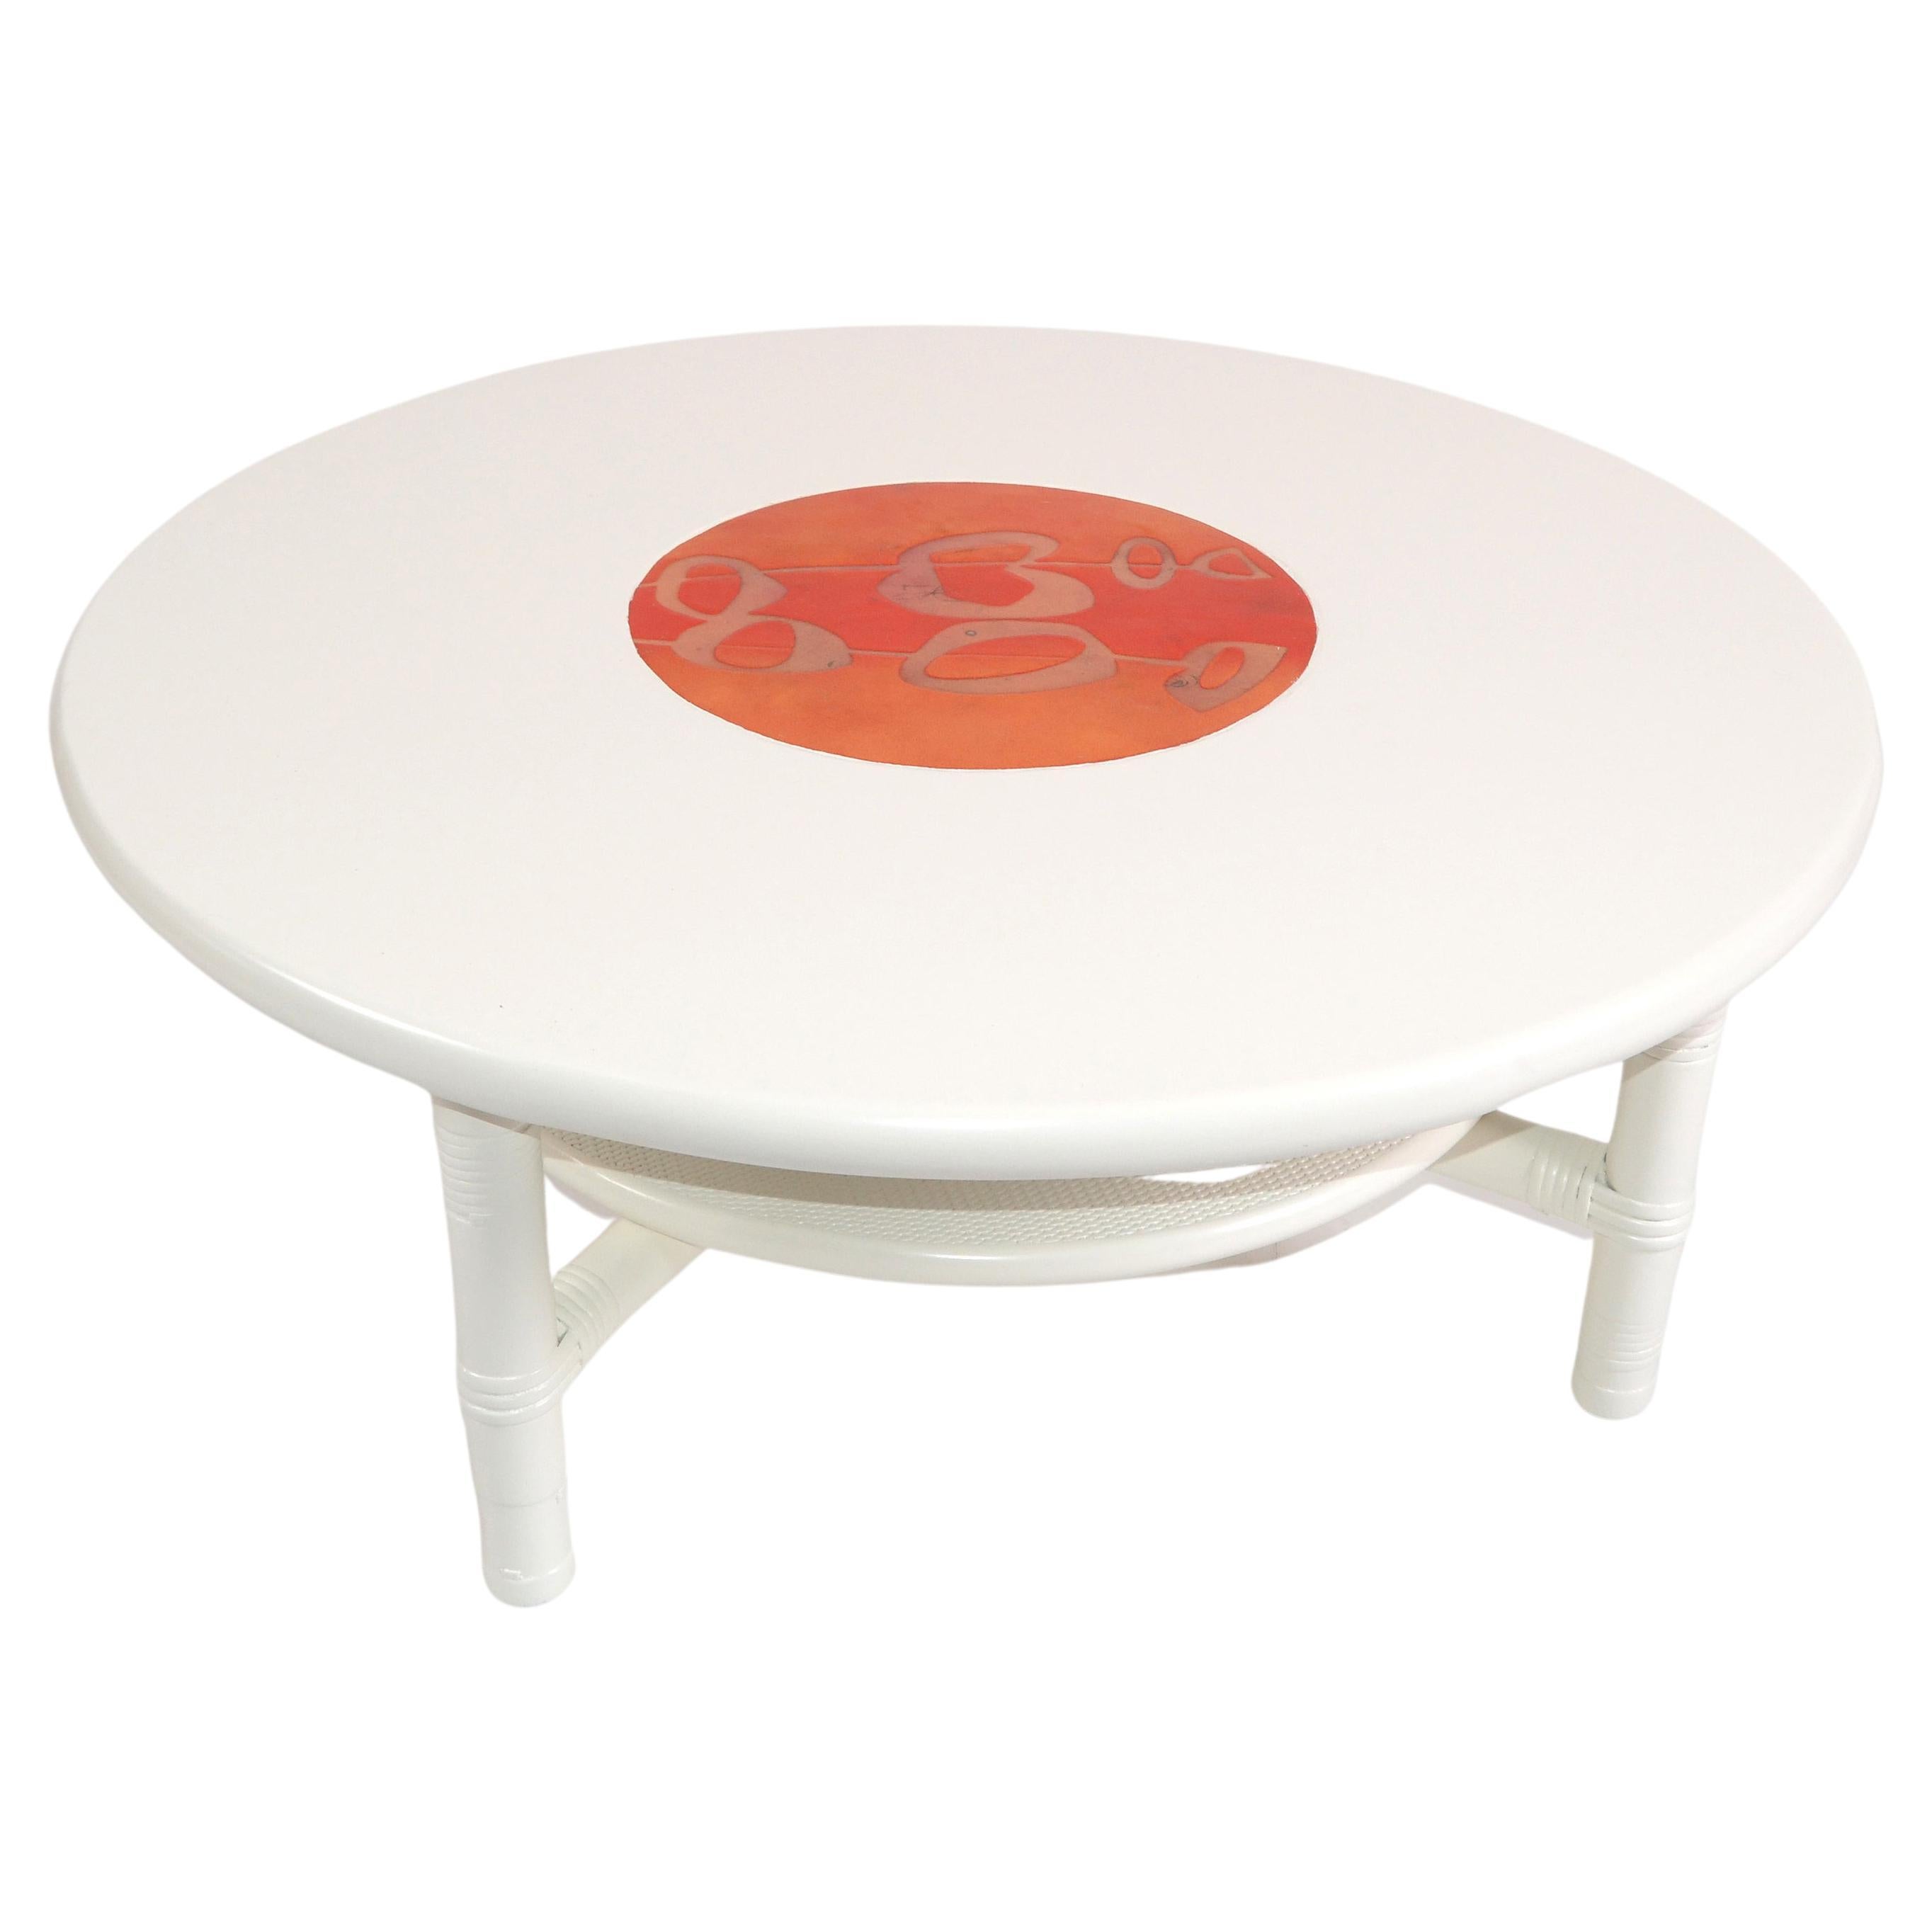 Mid-Century Modern round white two-tier bamboo, rattan and enamel coffee table from the late 1970.
The center of the top is a beautifully designed red and orange enamel inlay.
This coffee table has been restored and is ready for your home.
  